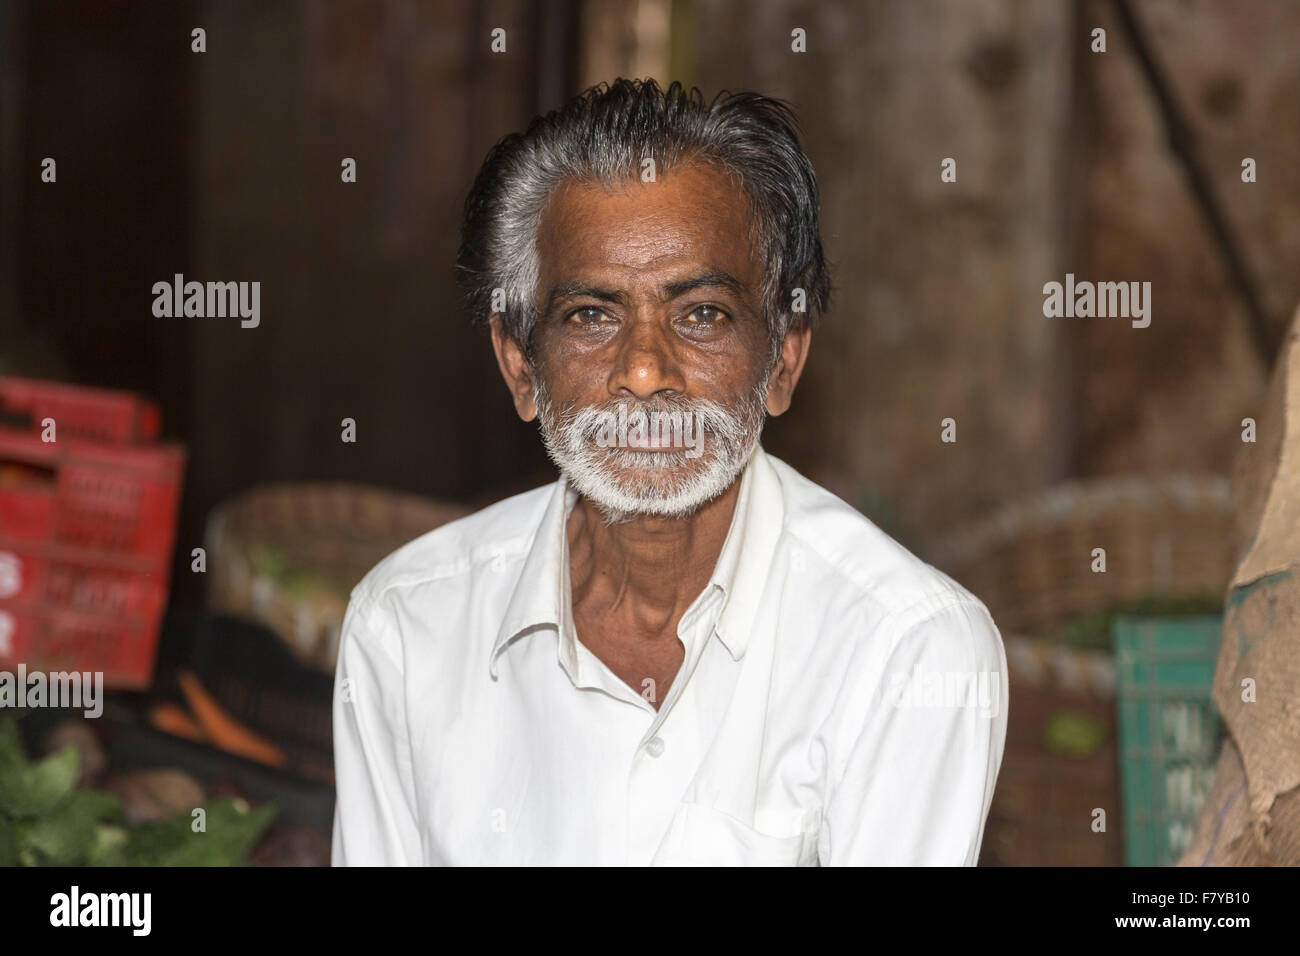 Dignified local Indian man with white beard in a market in the suburbs of Chennai, Tamil Nadu, southern India Stock Photo